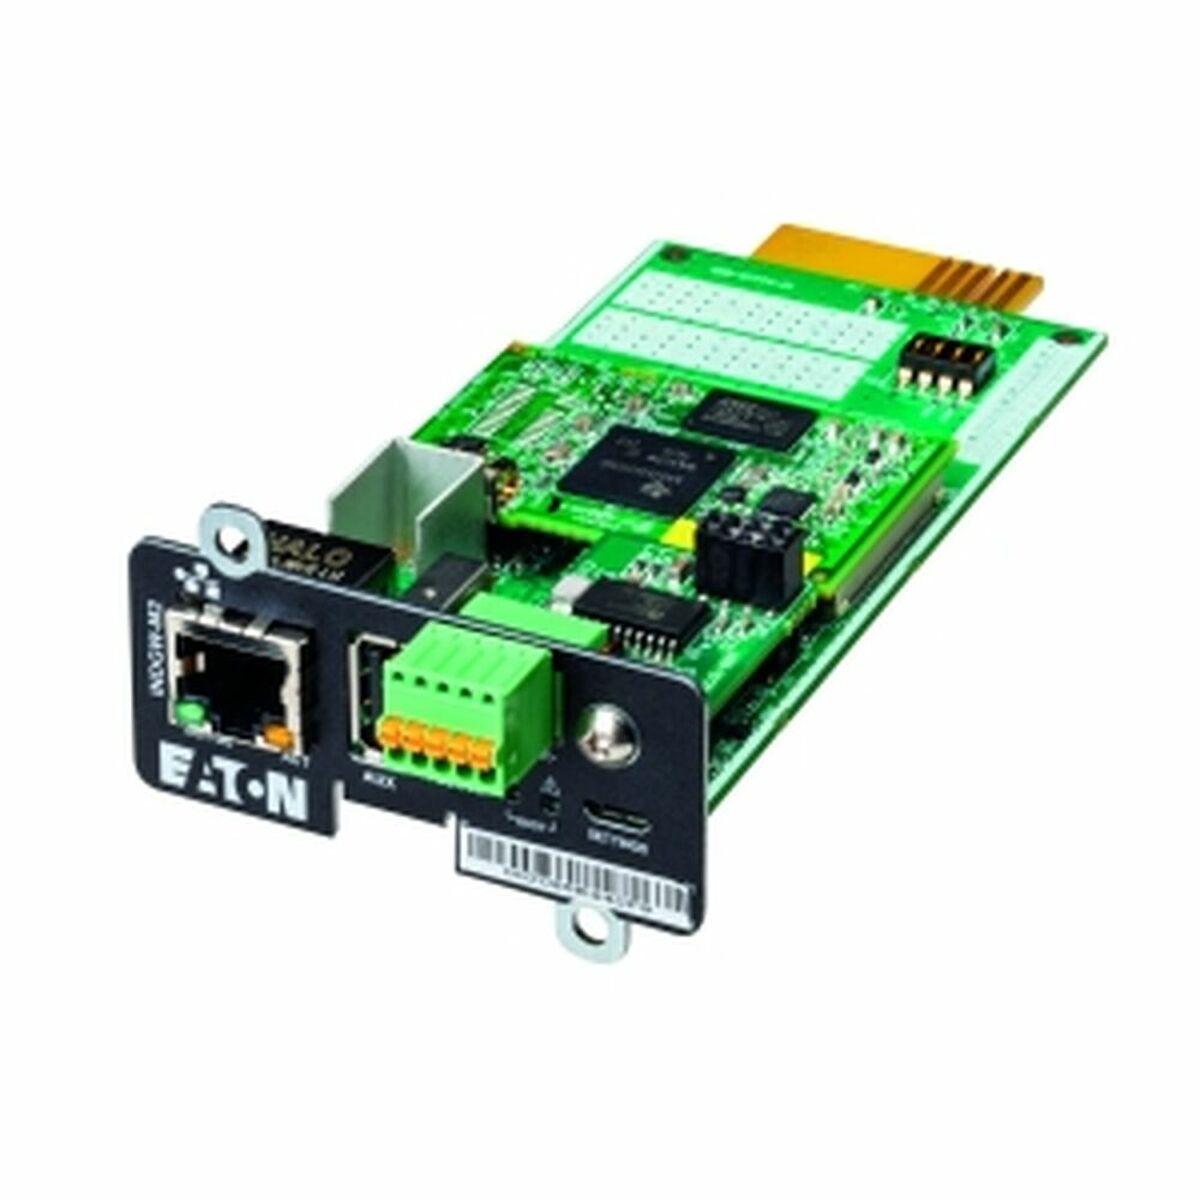 Network Card Eaton INDGW-M2, Eaton, Computing, Components, network-card-eaton-indgw-m2, Brand_Eaton, category-reference-2609, category-reference-2803, category-reference-2811, category-reference-t-19685, category-reference-t-19912, category-reference-t-21360, category-reference-t-25663, computers / components, Condition_NEW, Price_500 - 600, Teleworking, RiotNook